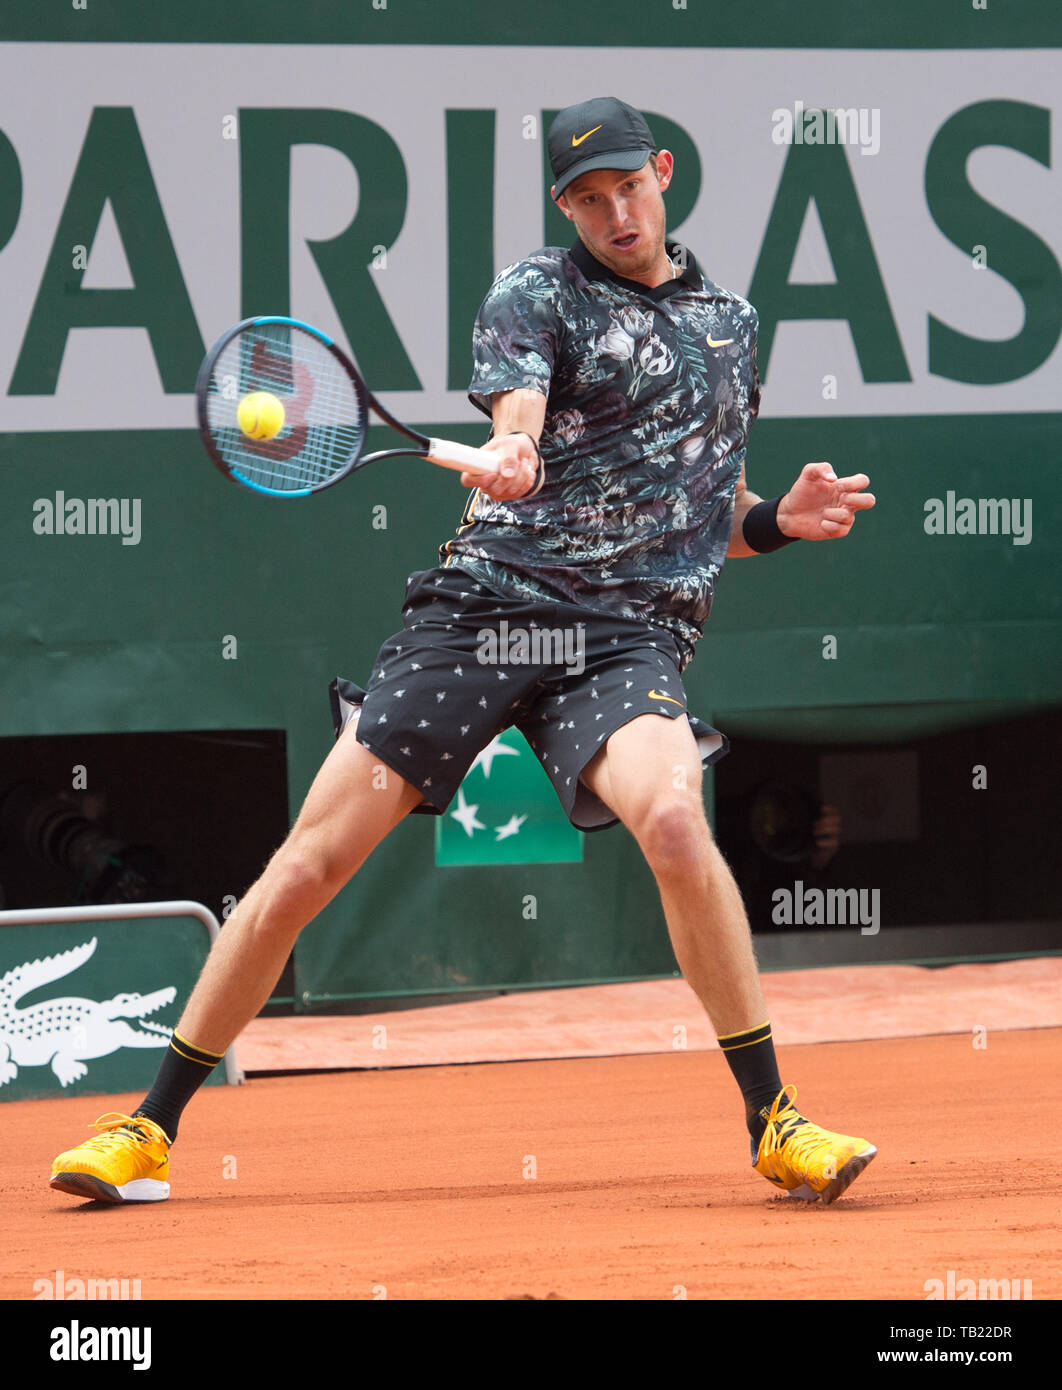 Paris, France. 28th May, 2019. Nicolas Jarry (CHI) is defeated by Juan  Martin del Potro (ARG) 6-3, 2-6, 1-6, 4-6, at the French Open being played  at Stade Roland-Garros in Paris, France. ©